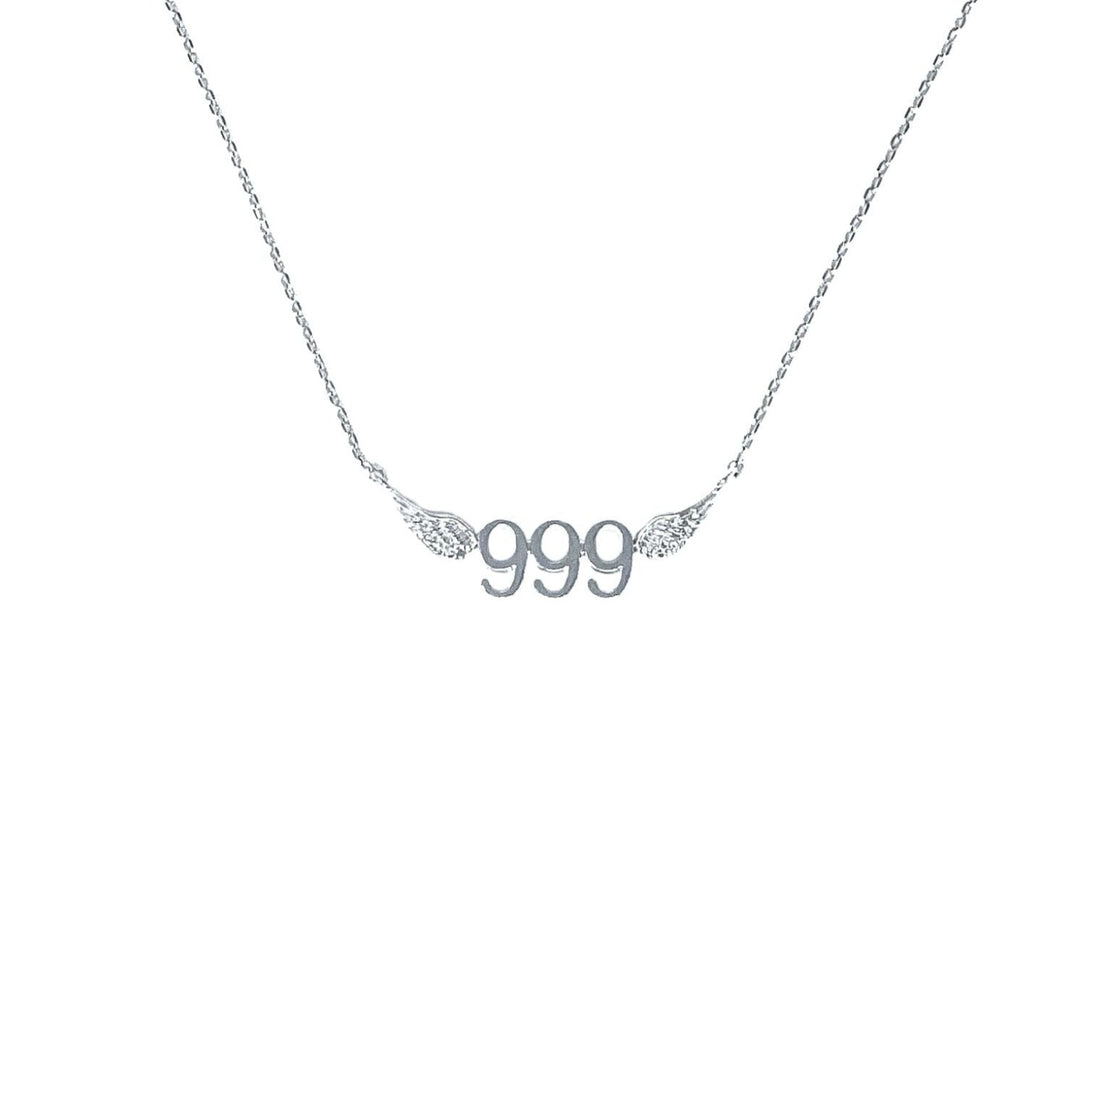 999 Pure Silver Chain Necklace | 999 Sterling Silver Chain | 999 Fine Silver  Jewelrys - Necklaces - Aliexpress